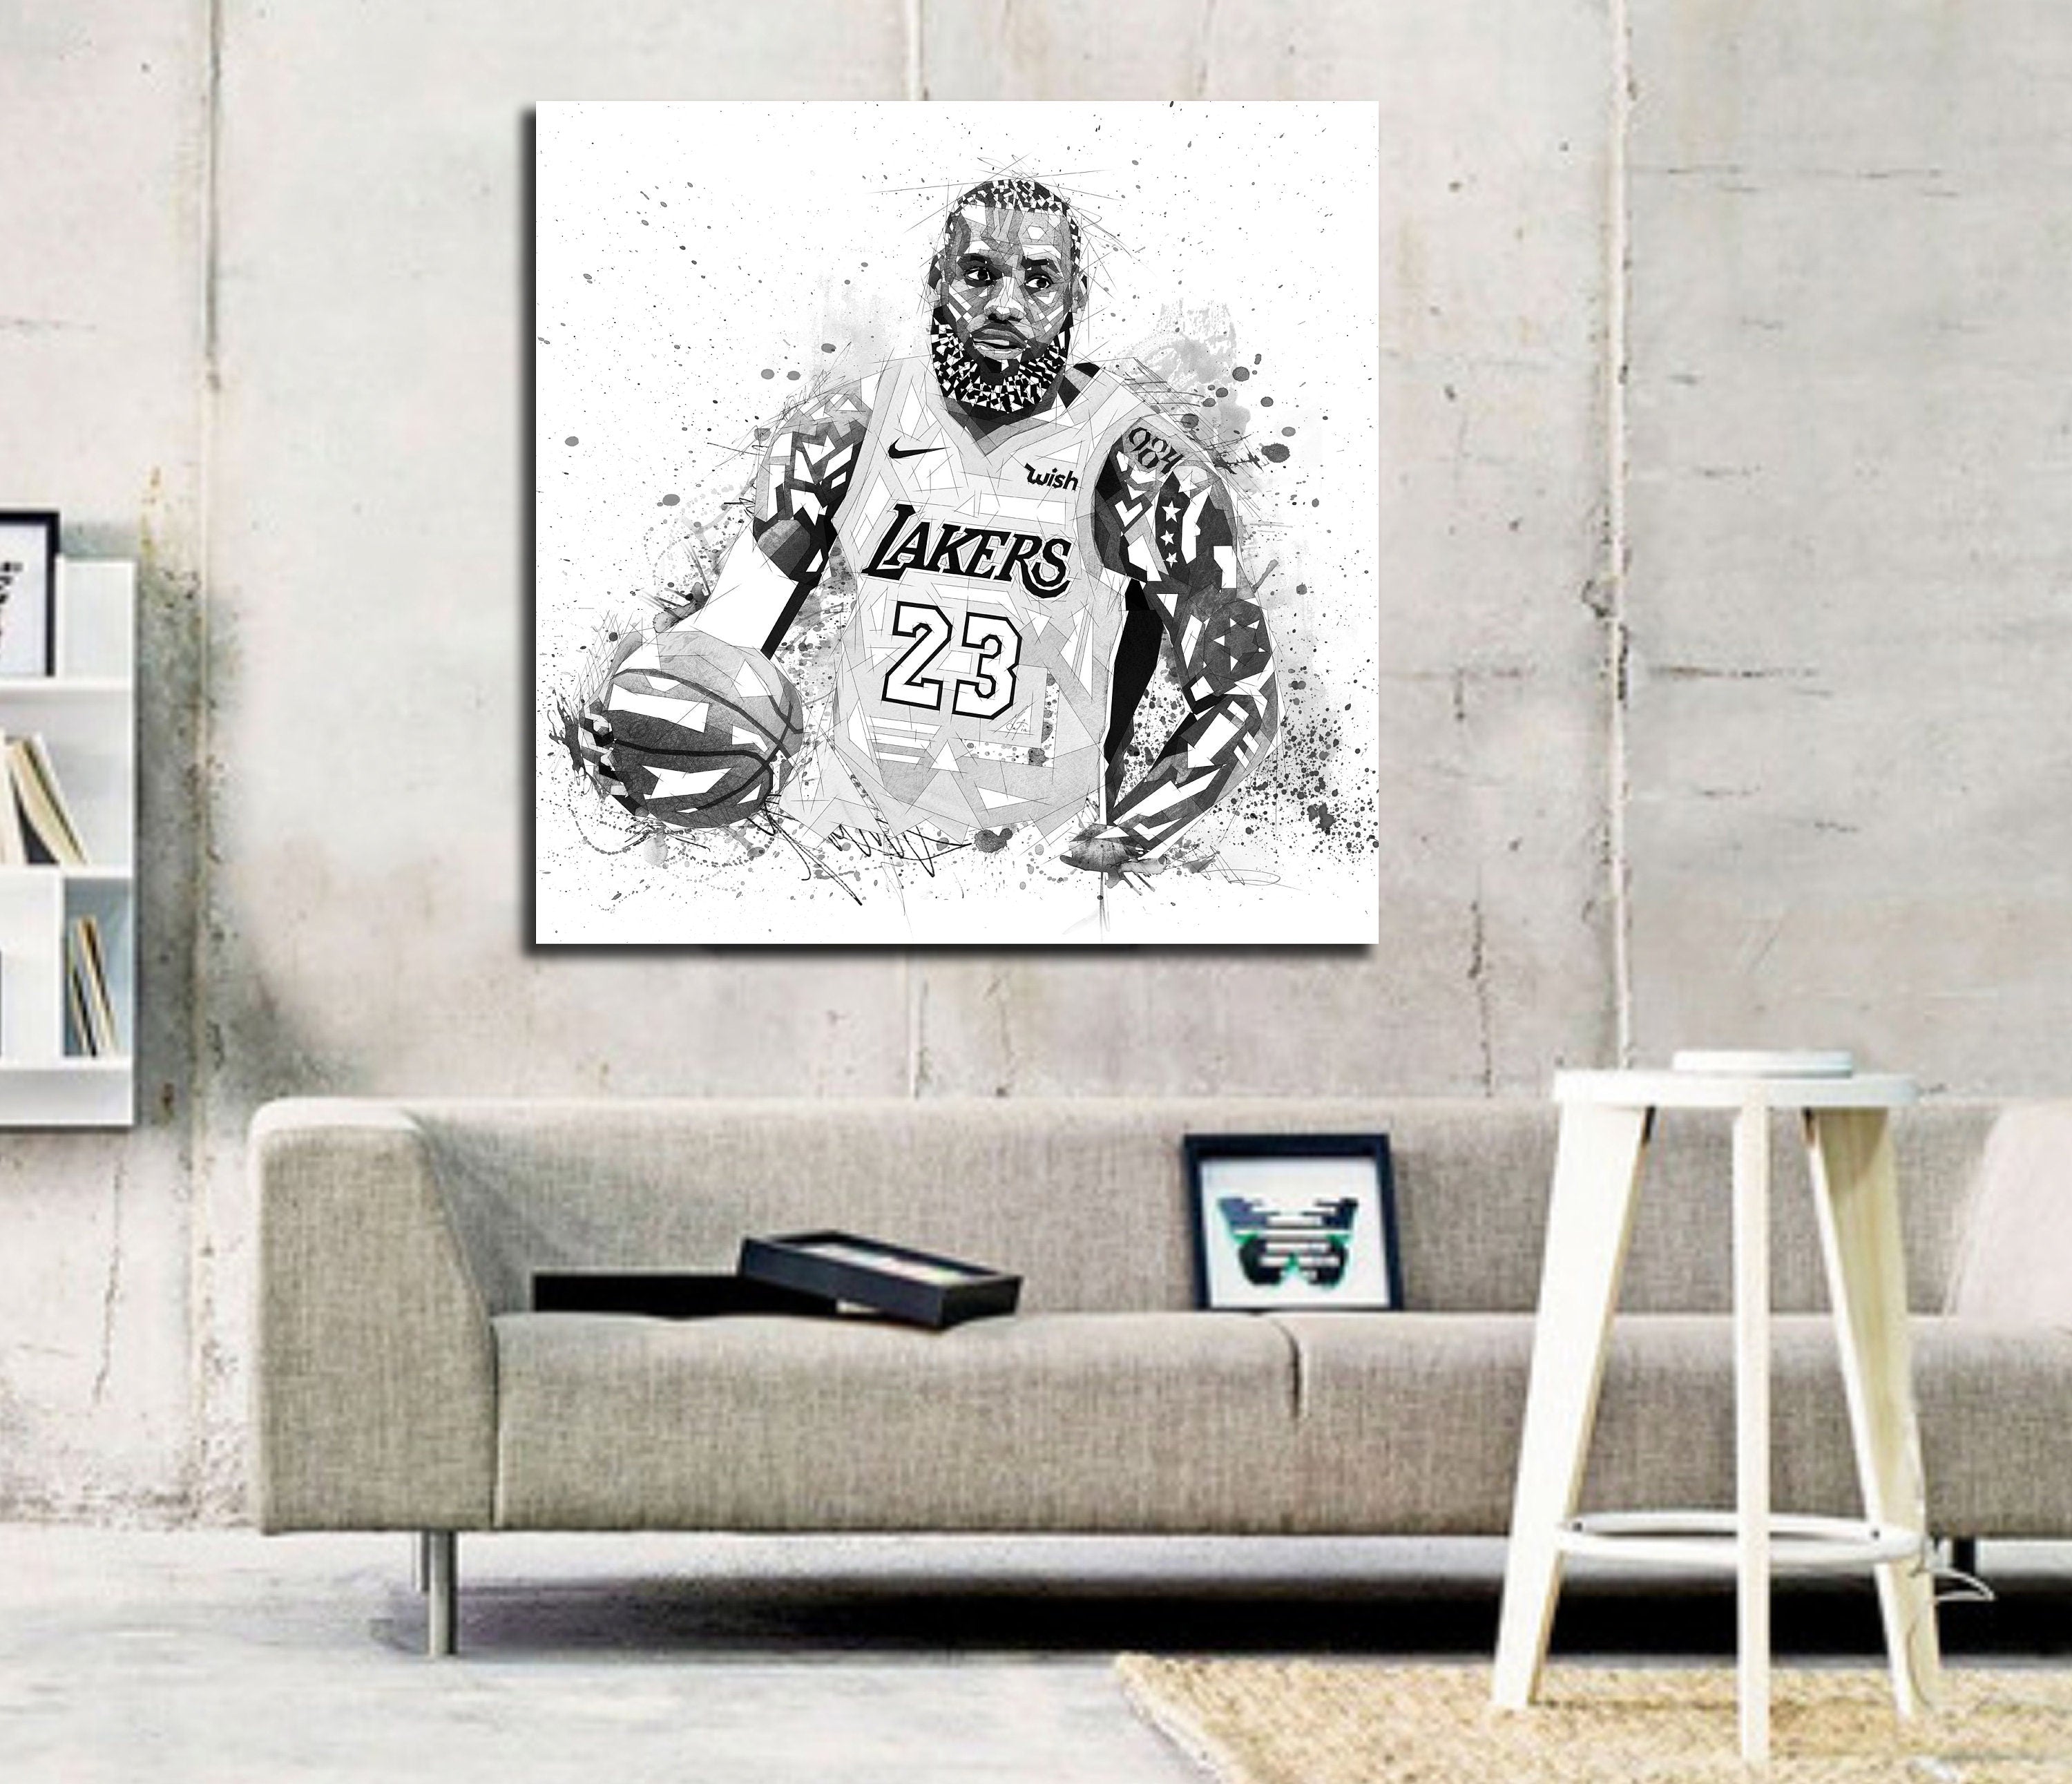 Lebron James lakers player poster 